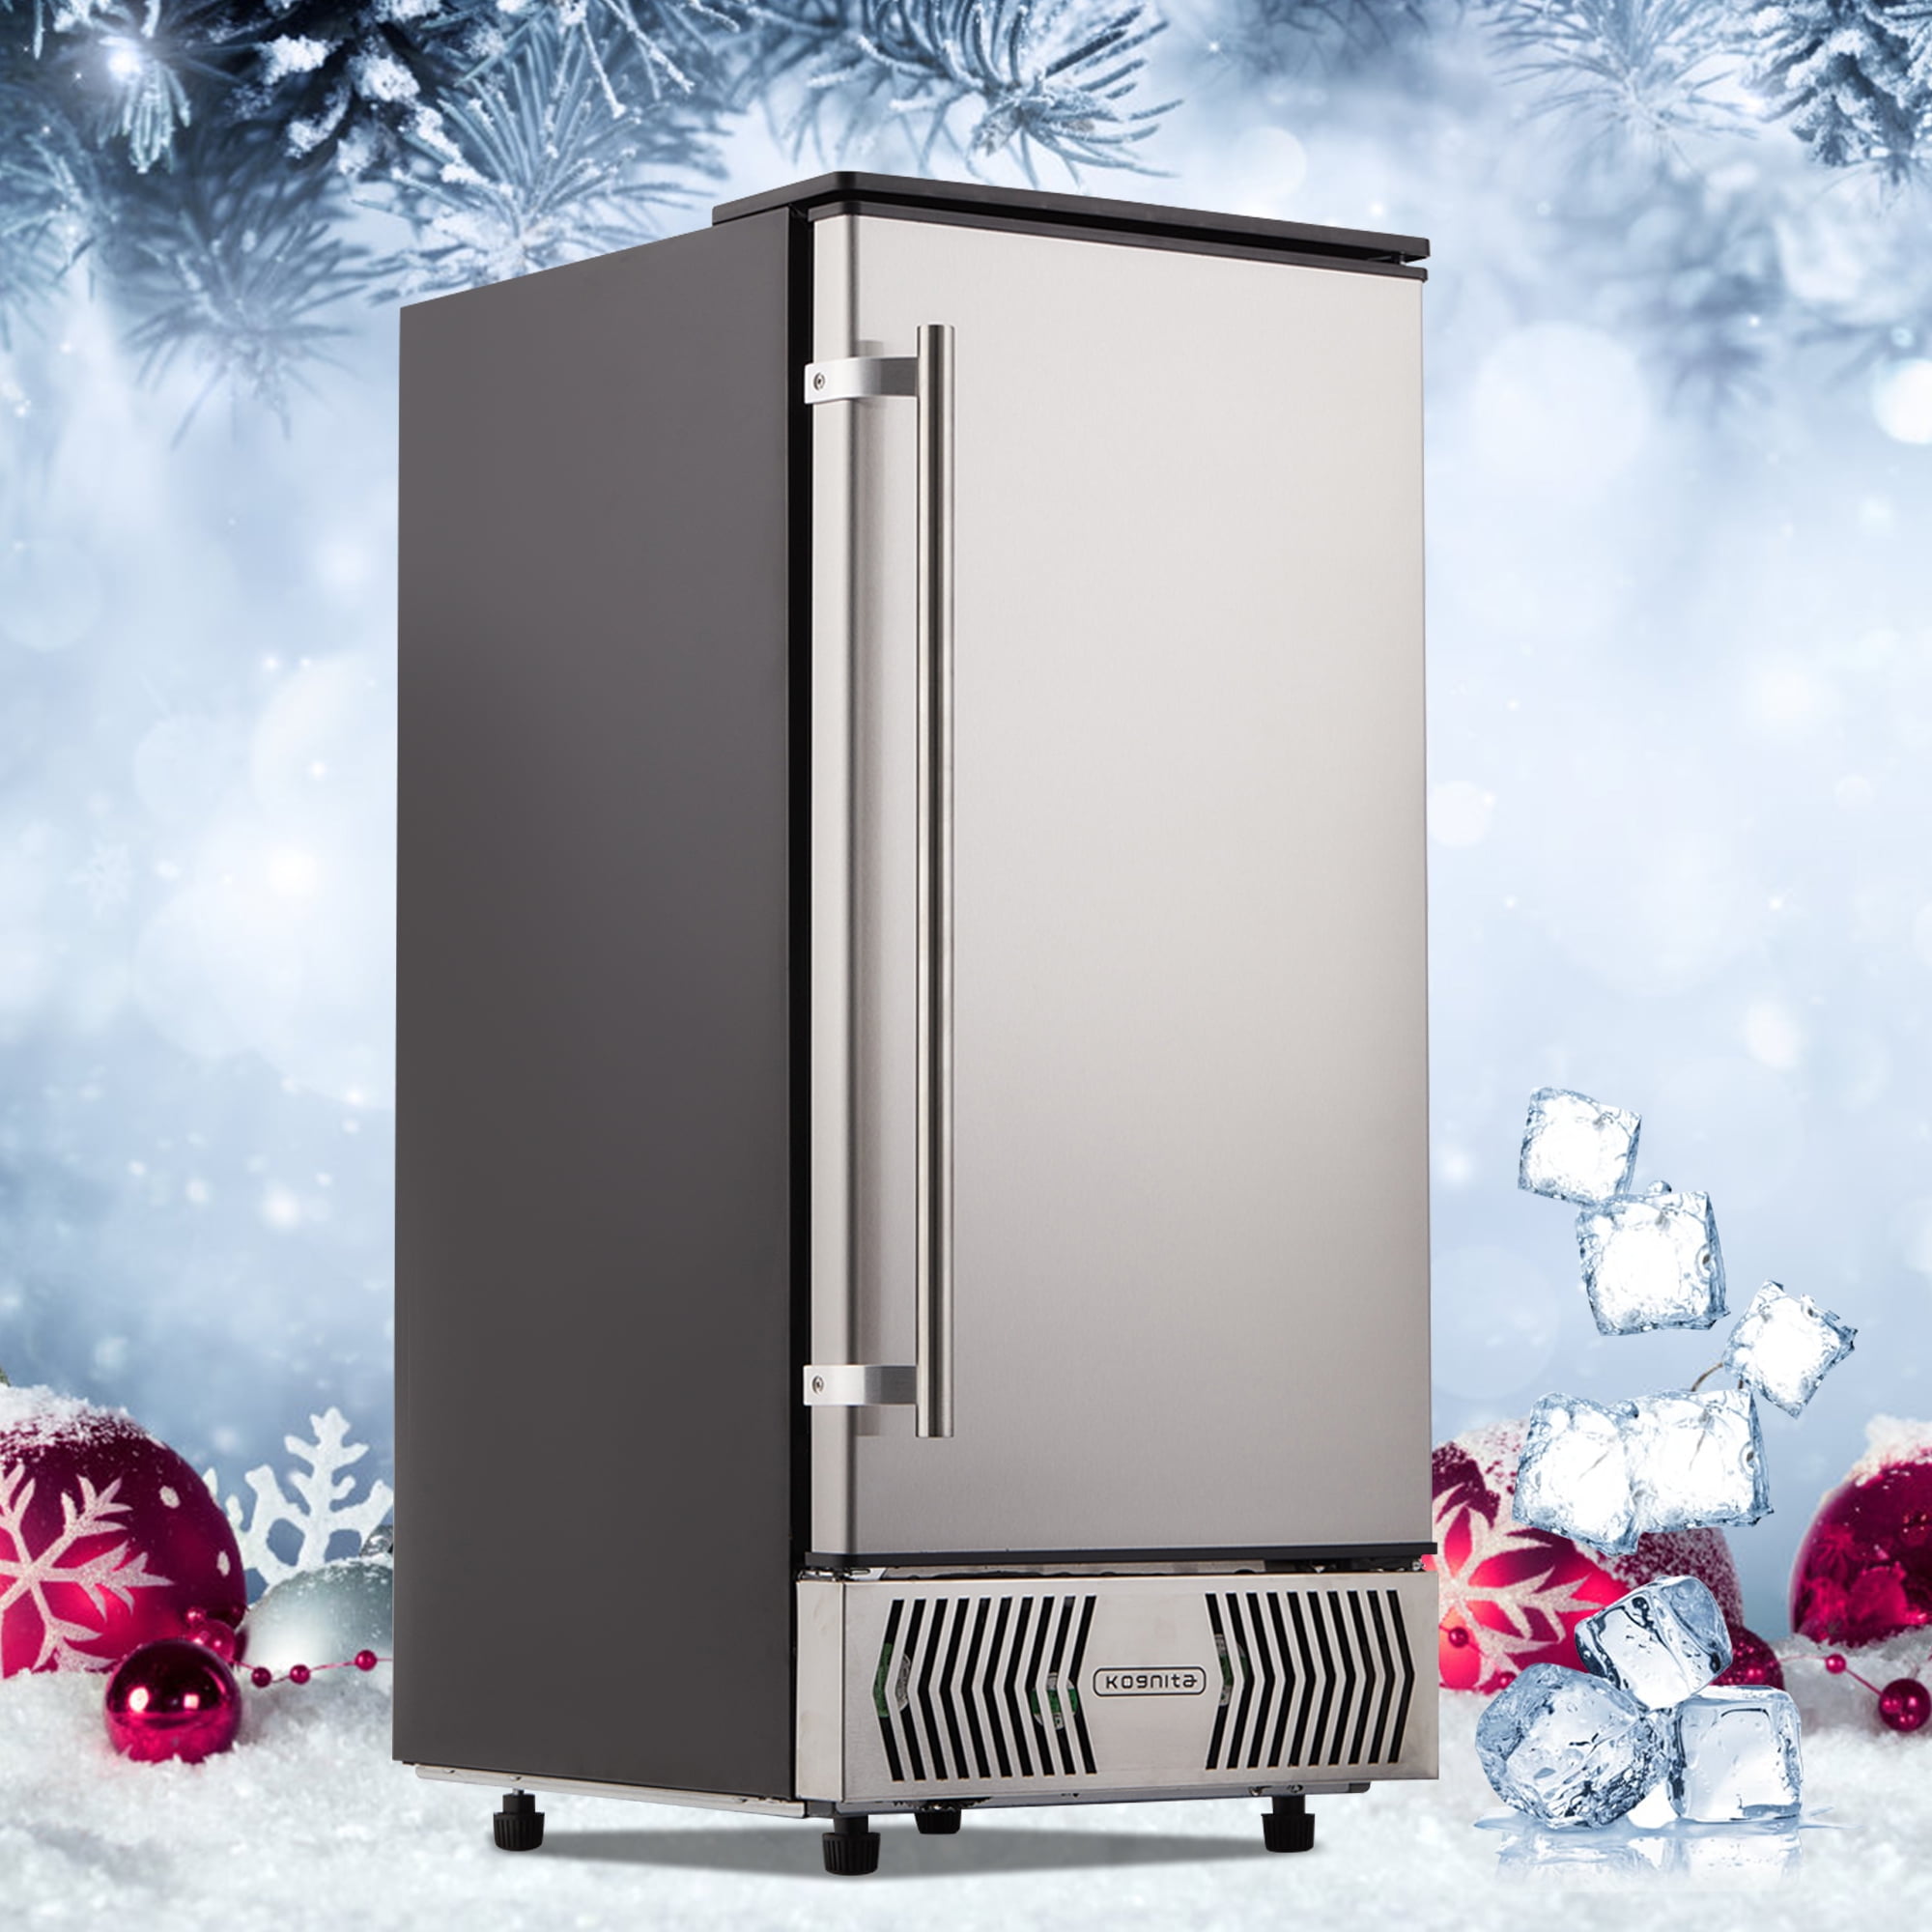 Two sets Commercial Ice Maker Machine, 80lbs/24H Stainless Steel